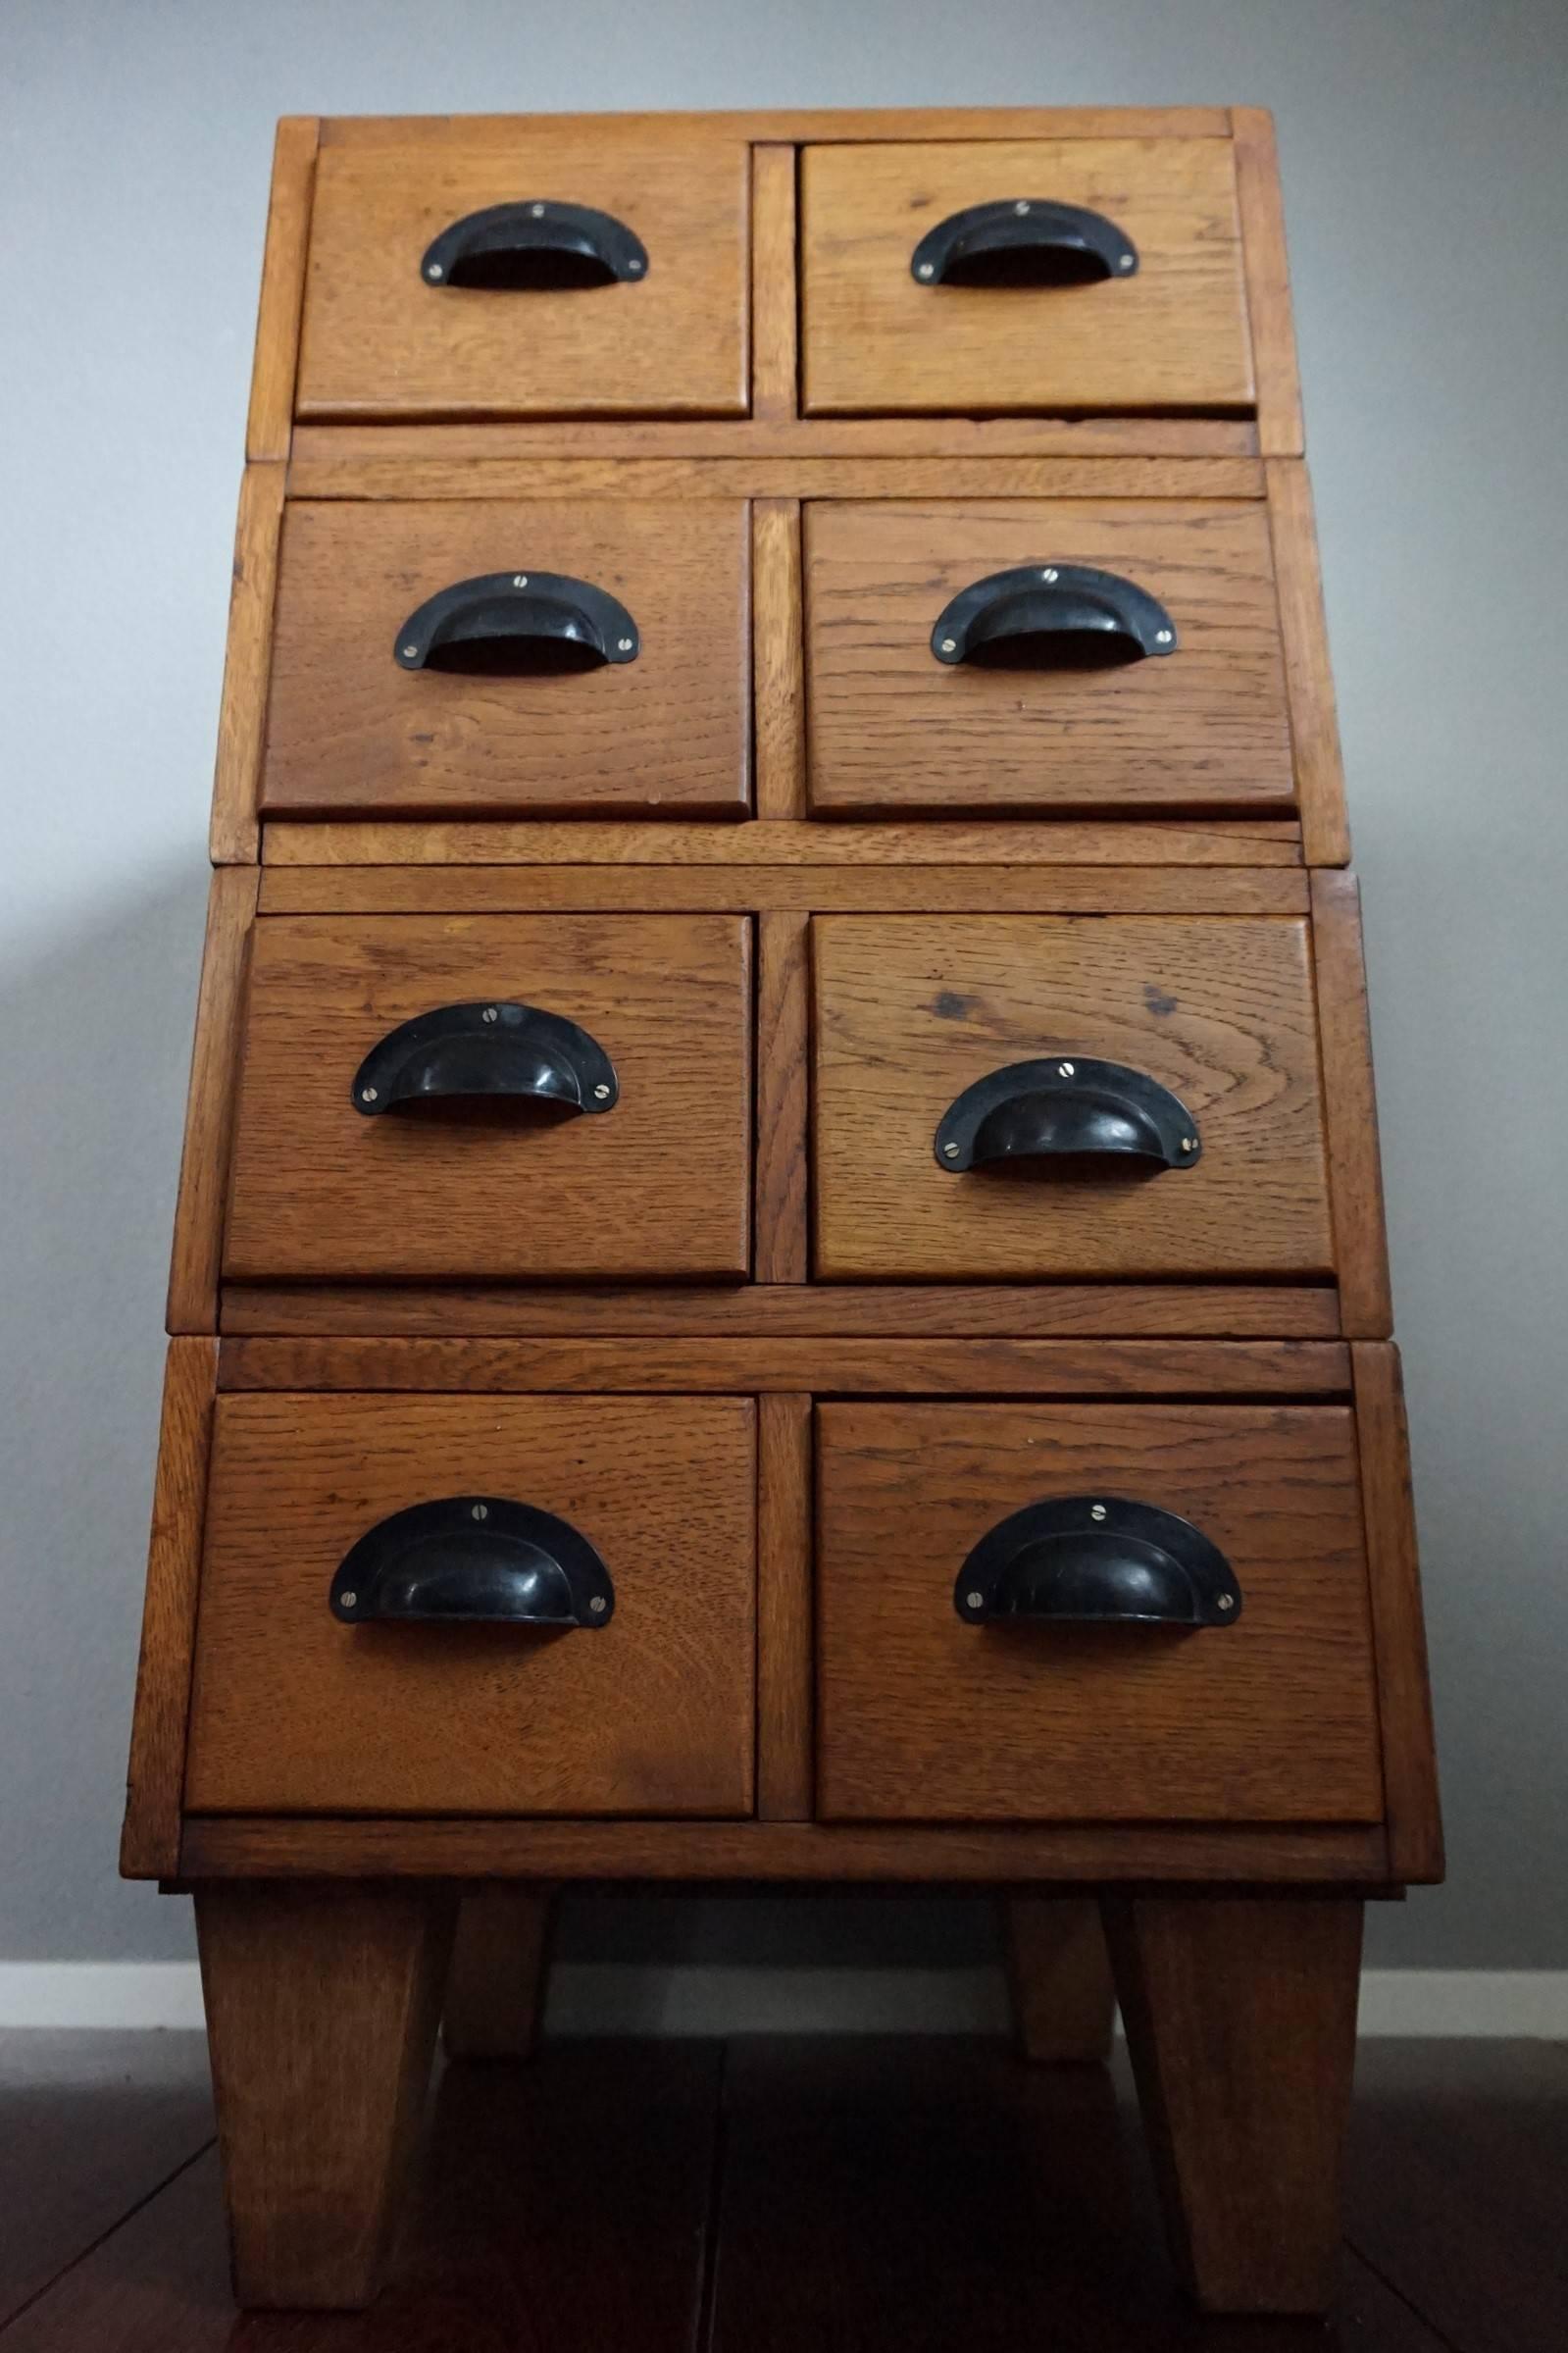 Blackened Early 20h Century Small Chest of Drawers / Art Deco Era Oak Filing Cabinet